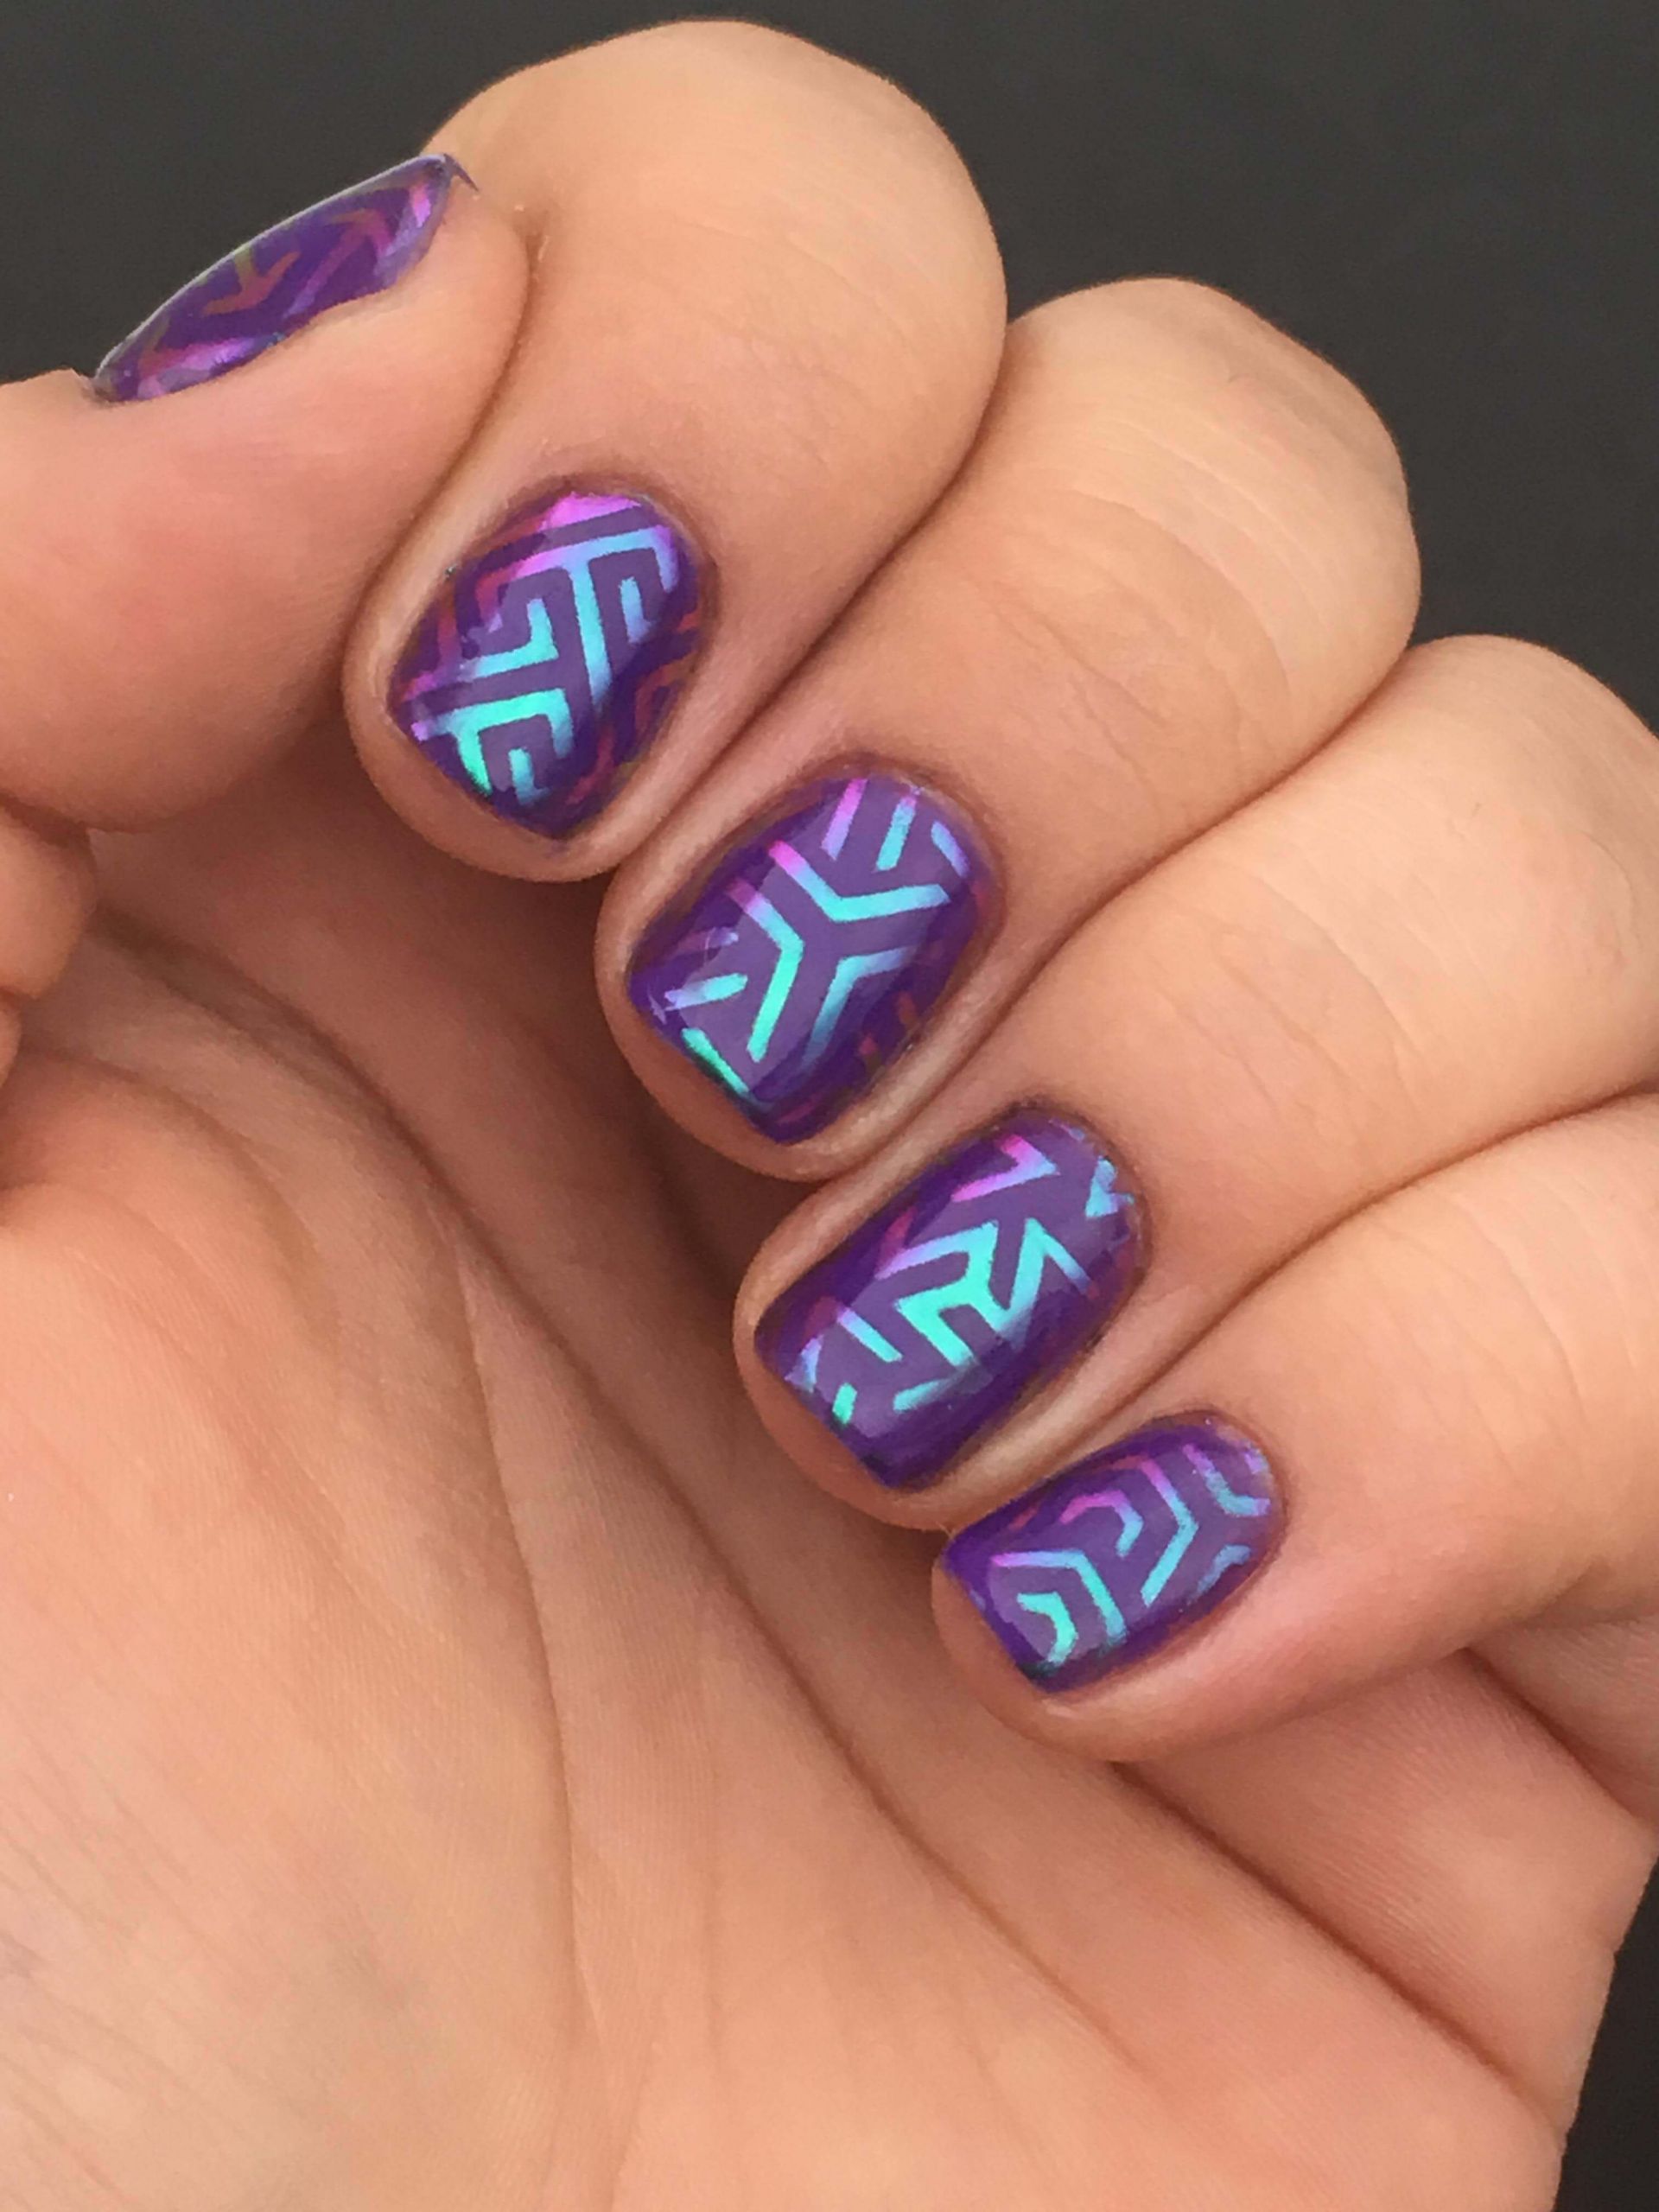 How To Nail Designs
 Learn How To Make This Cool Geometric Nail Art With